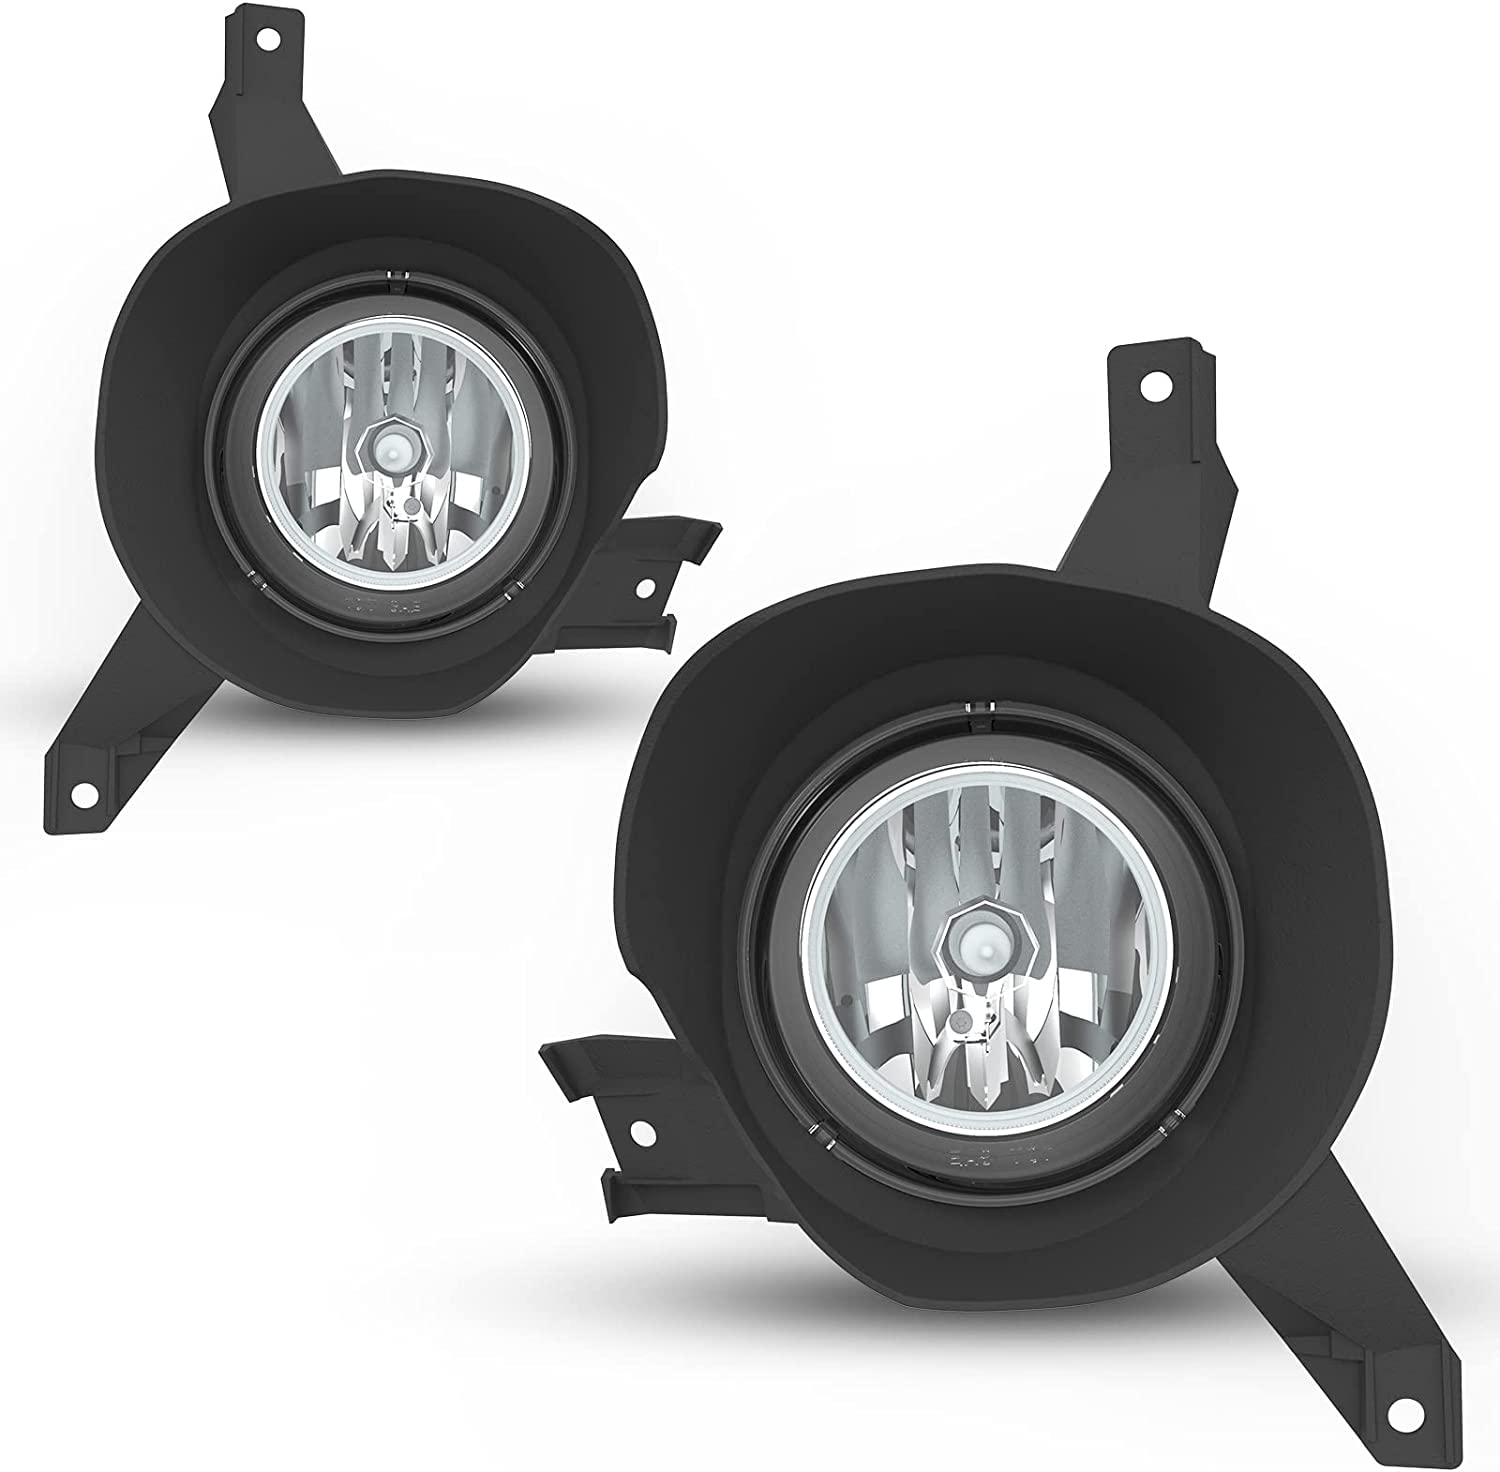 Winjet WJ30-0553-09 2001-2005 Ford Explorer Sport Trac / 2001-2003 Ford Explorer Sport Clear Lens Factory OEM Style OE Fitment Replacement Fog Light A Pair Set